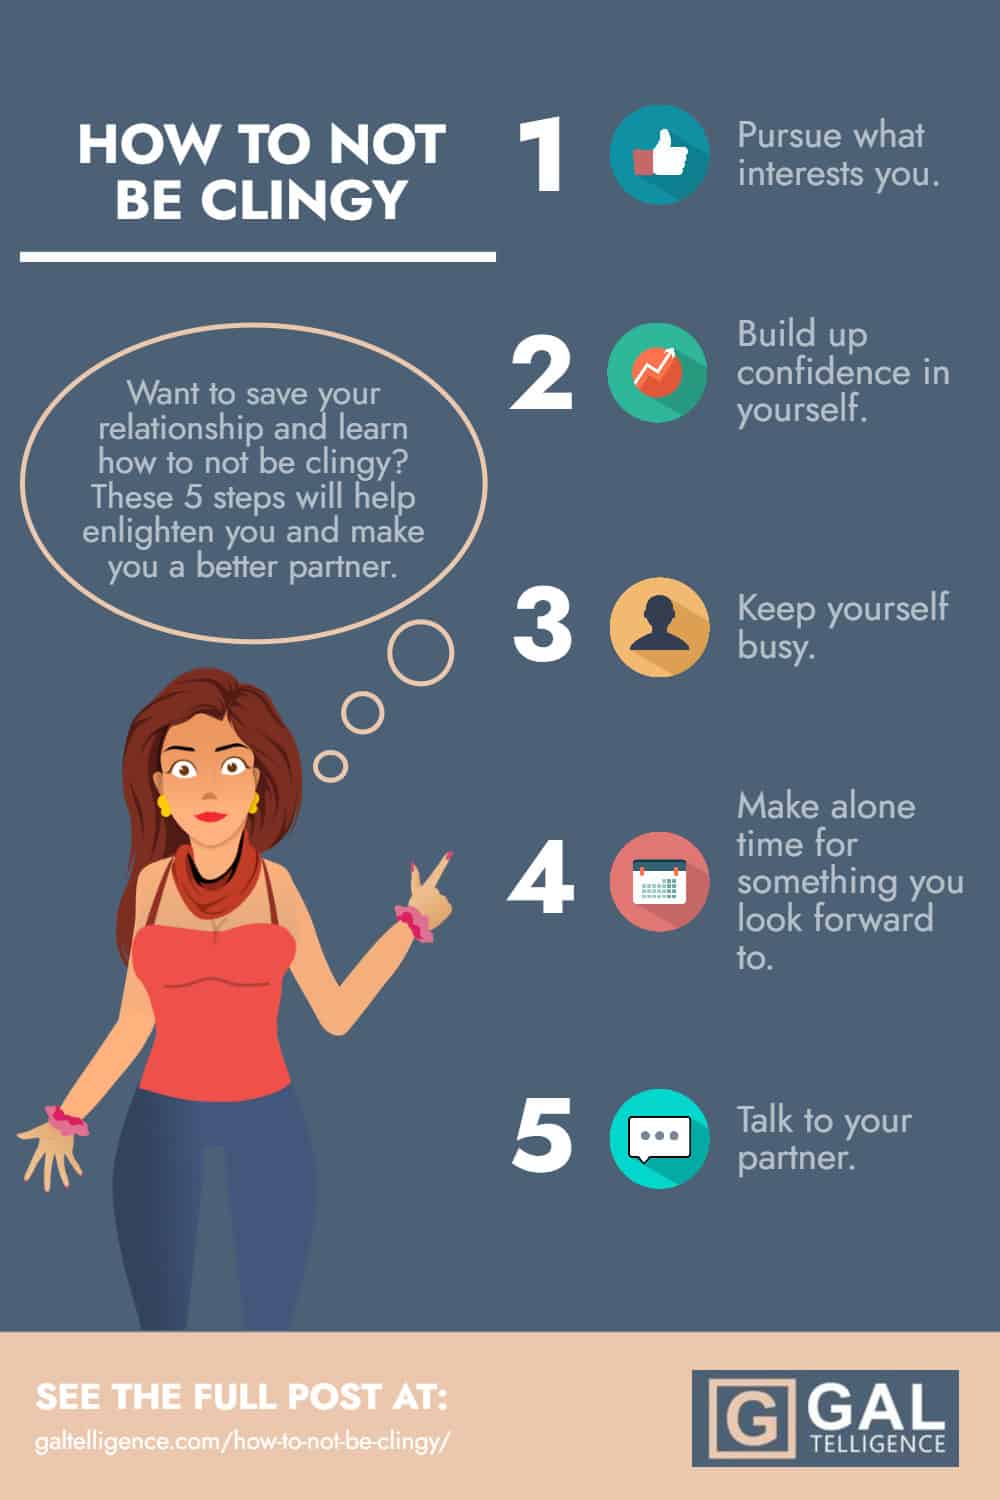 How to not be clingy - Infographic